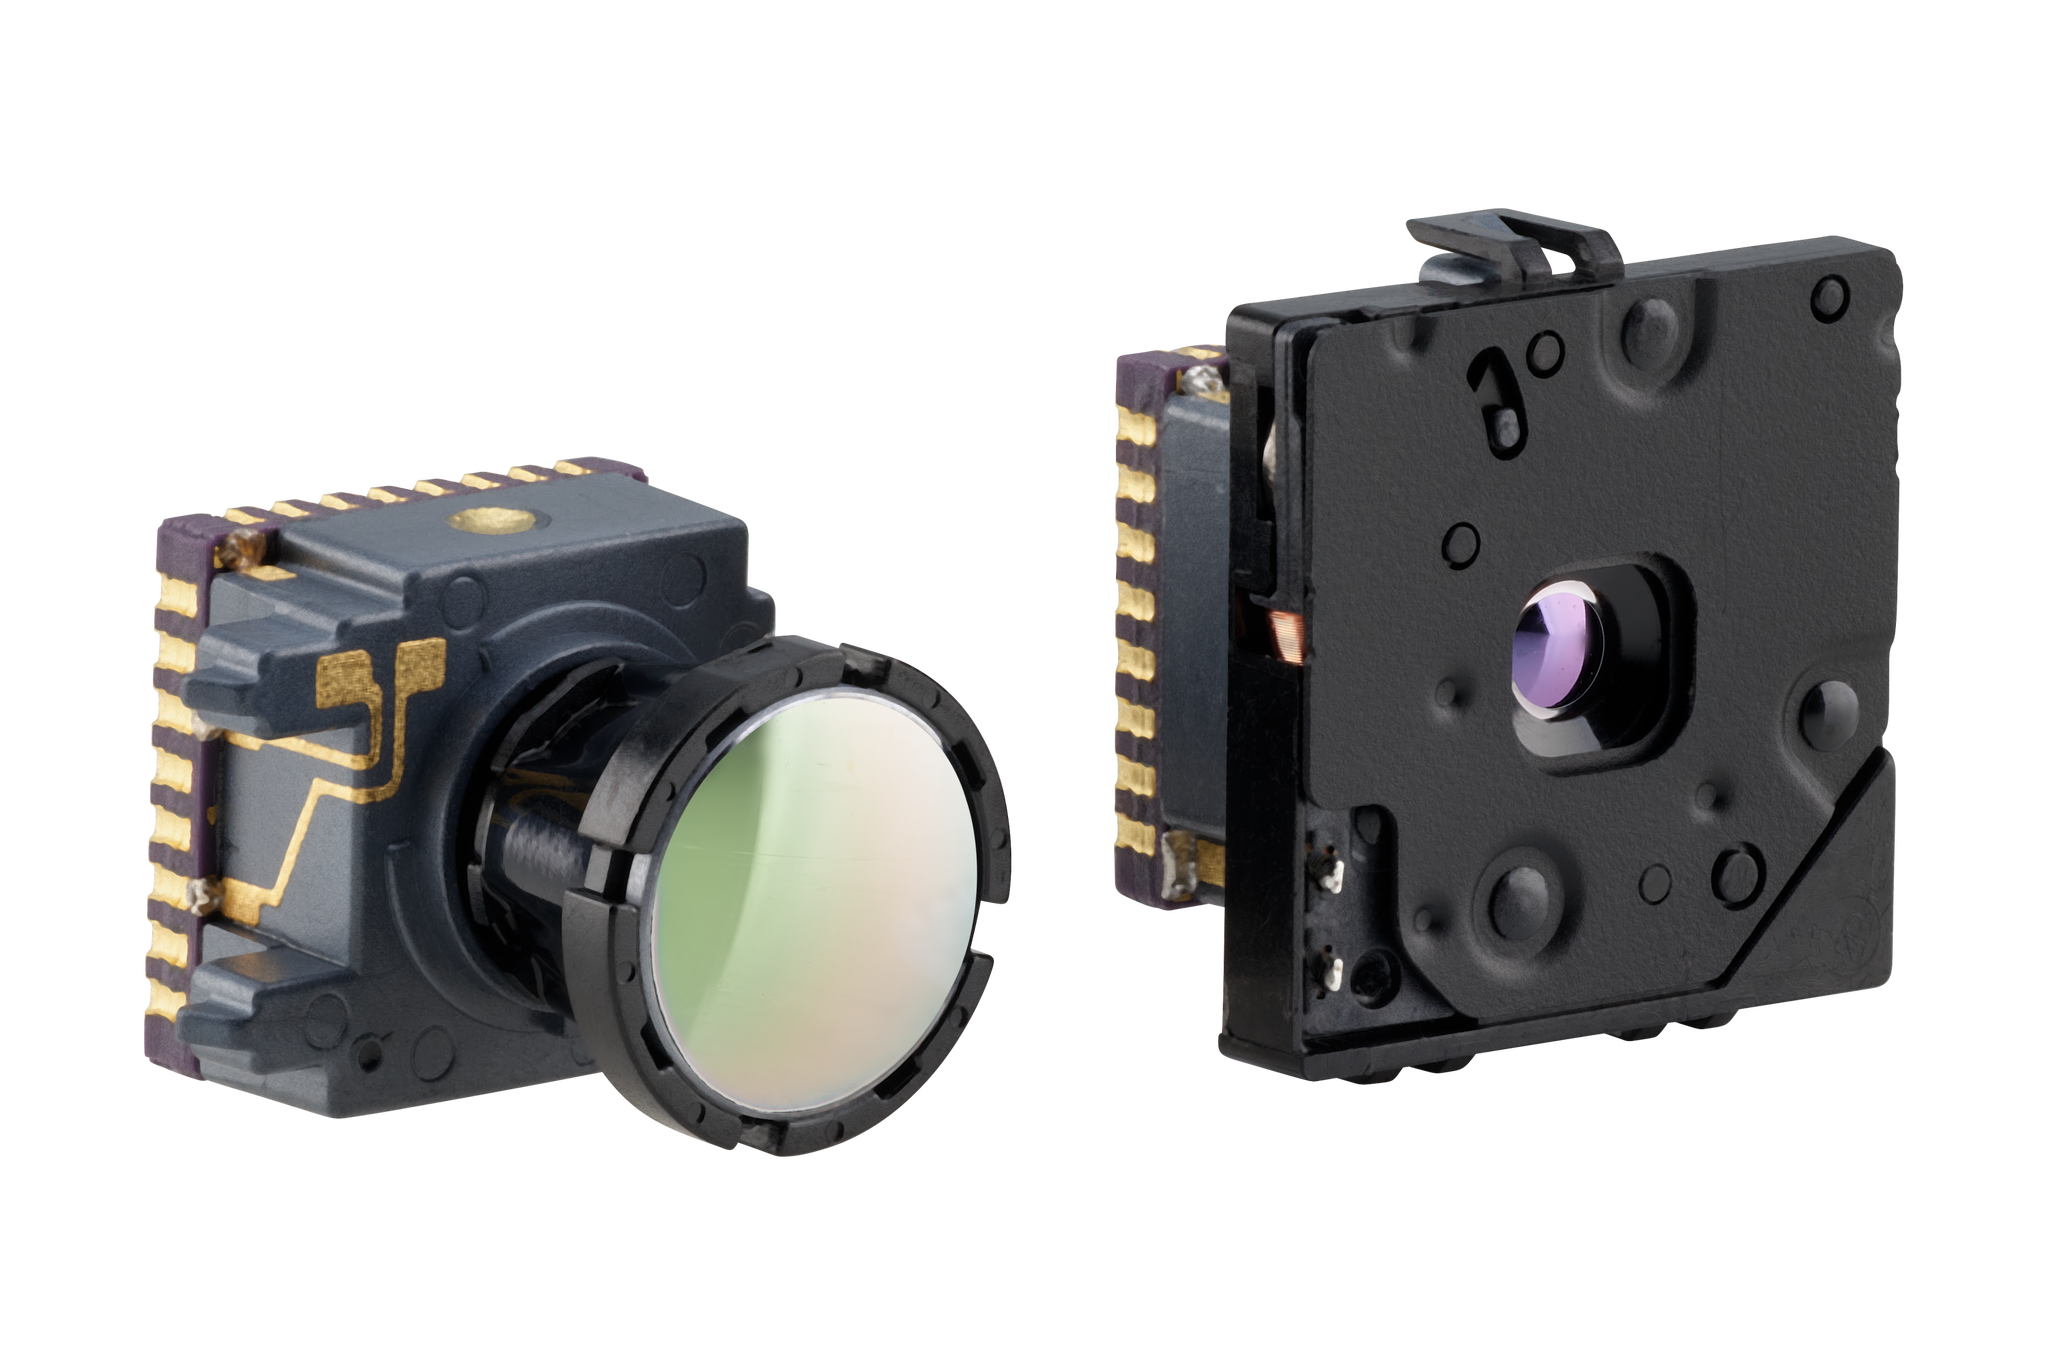 Thermal camera delivers ultra-wide 160-degree field of view - Electronic  Products & TechnologyElectronic Products & Technology